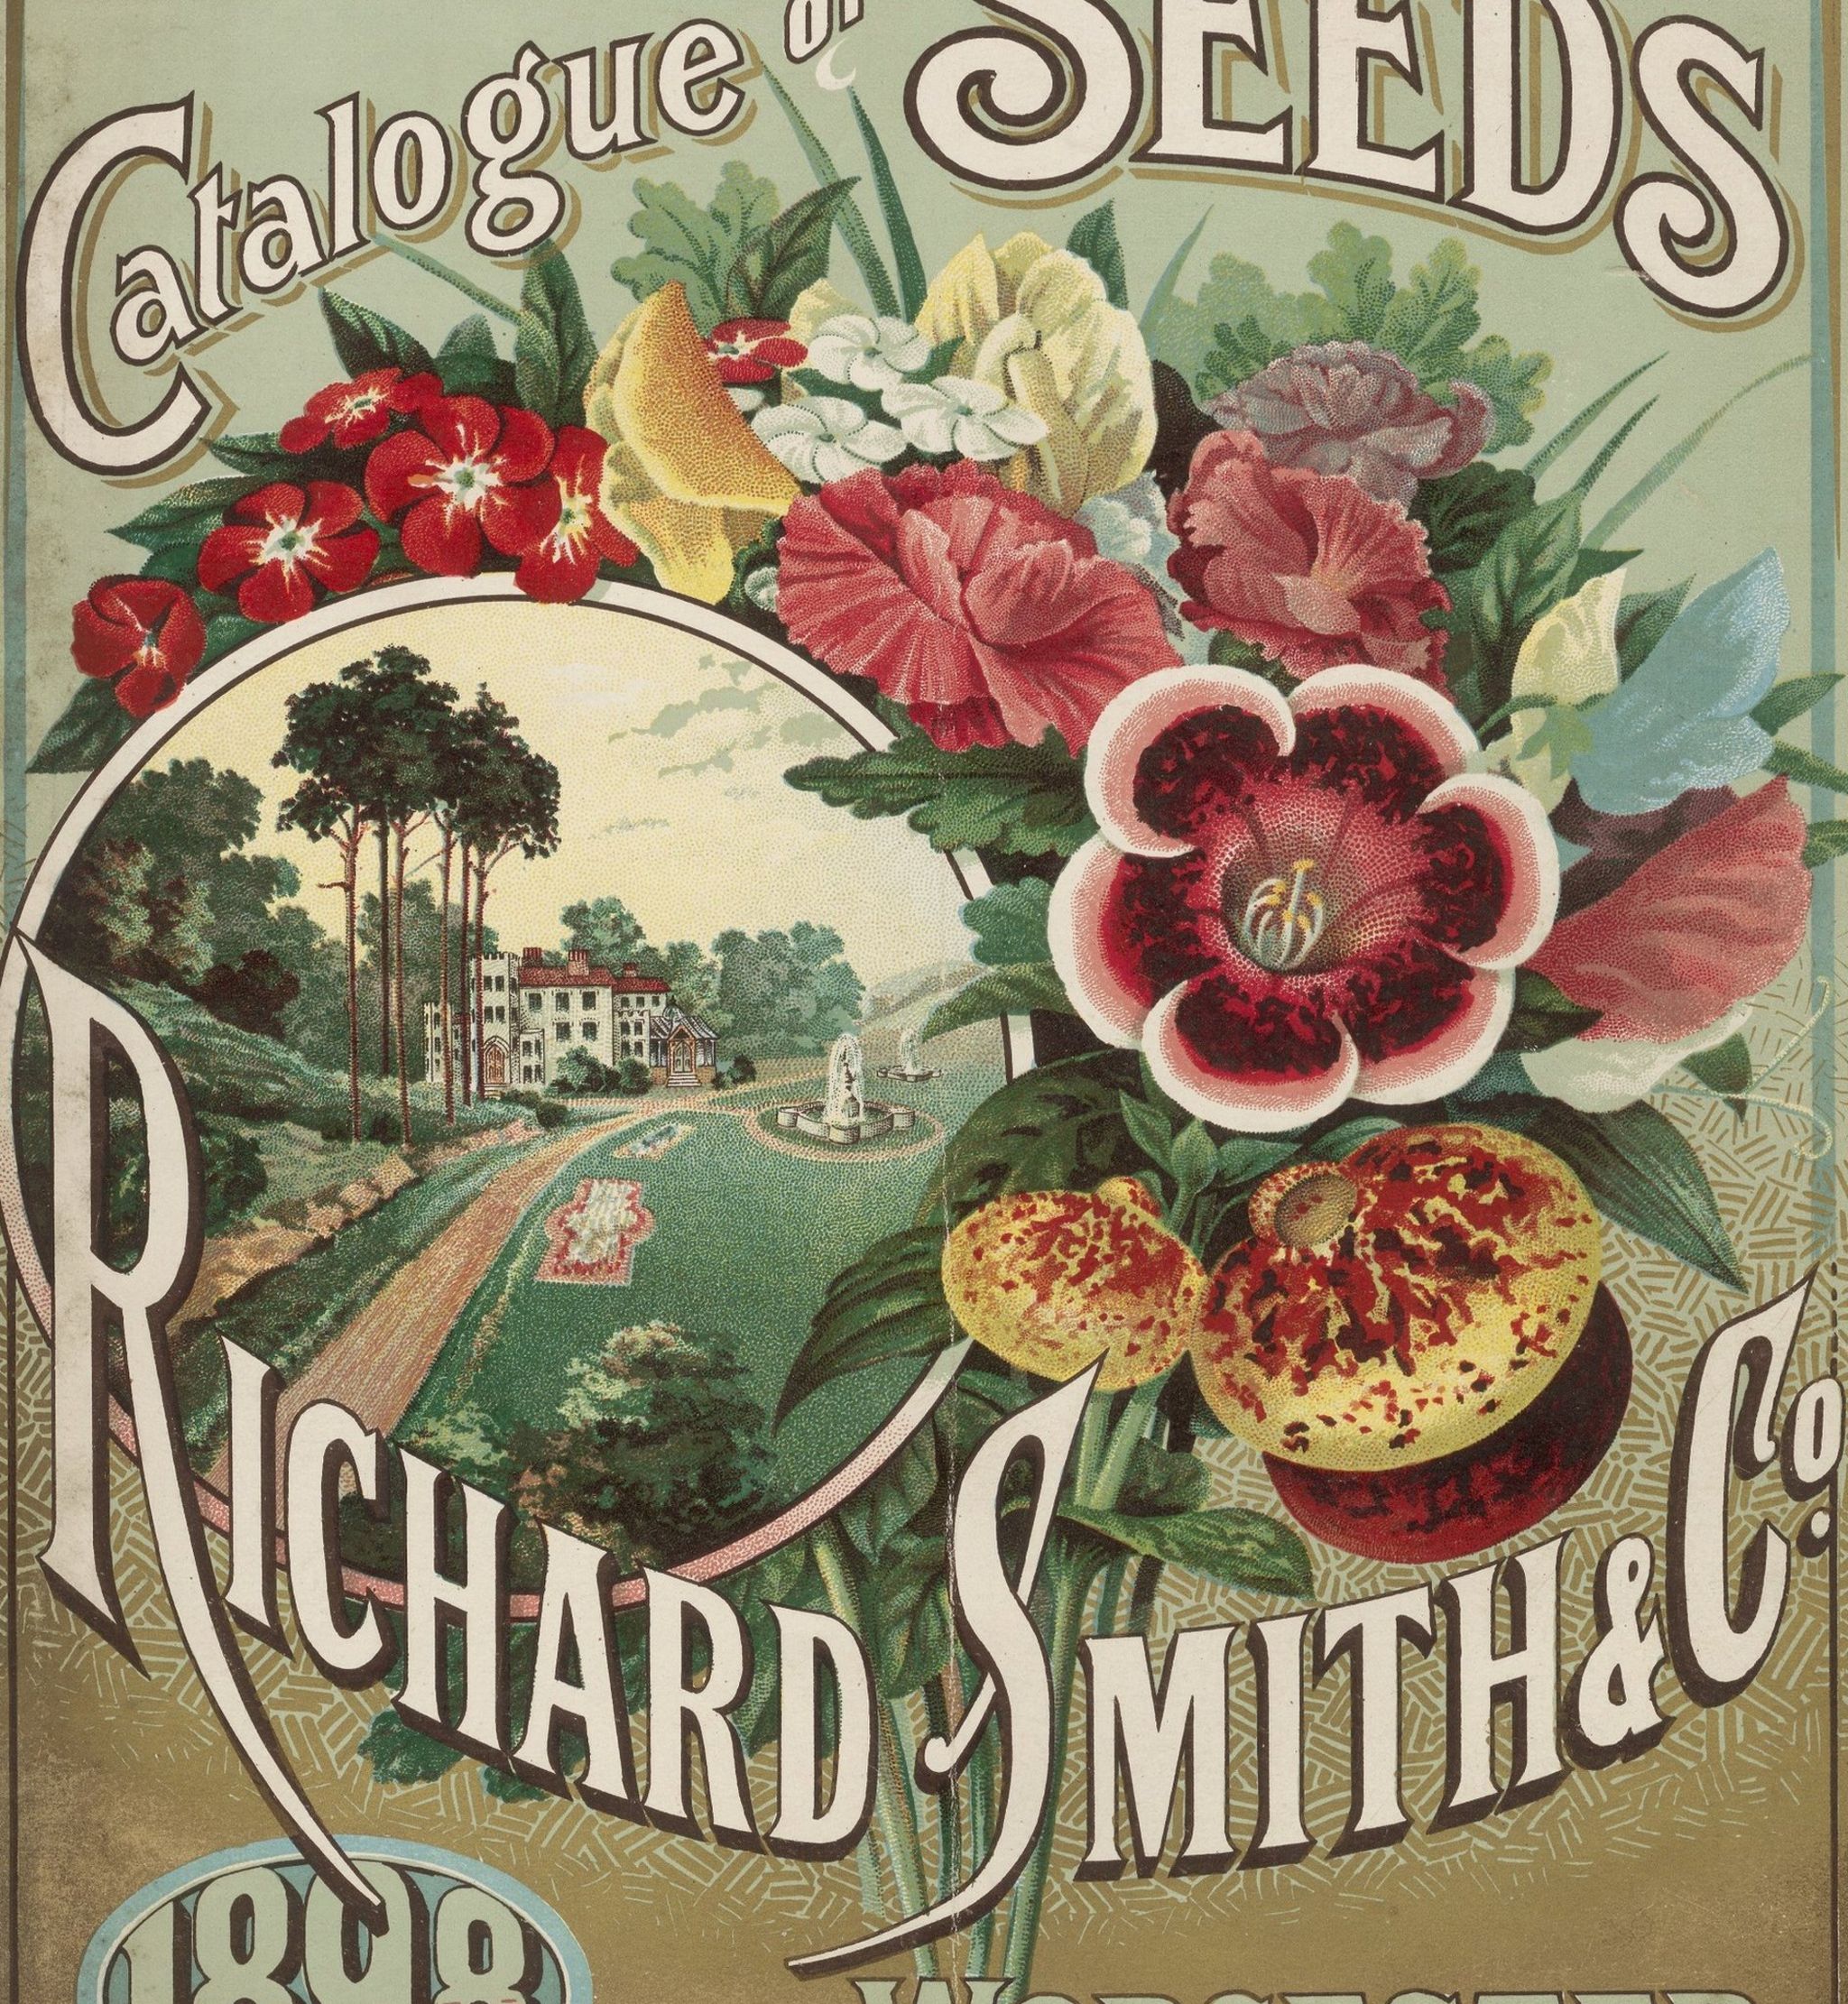 A catalogue of seeds from 1898